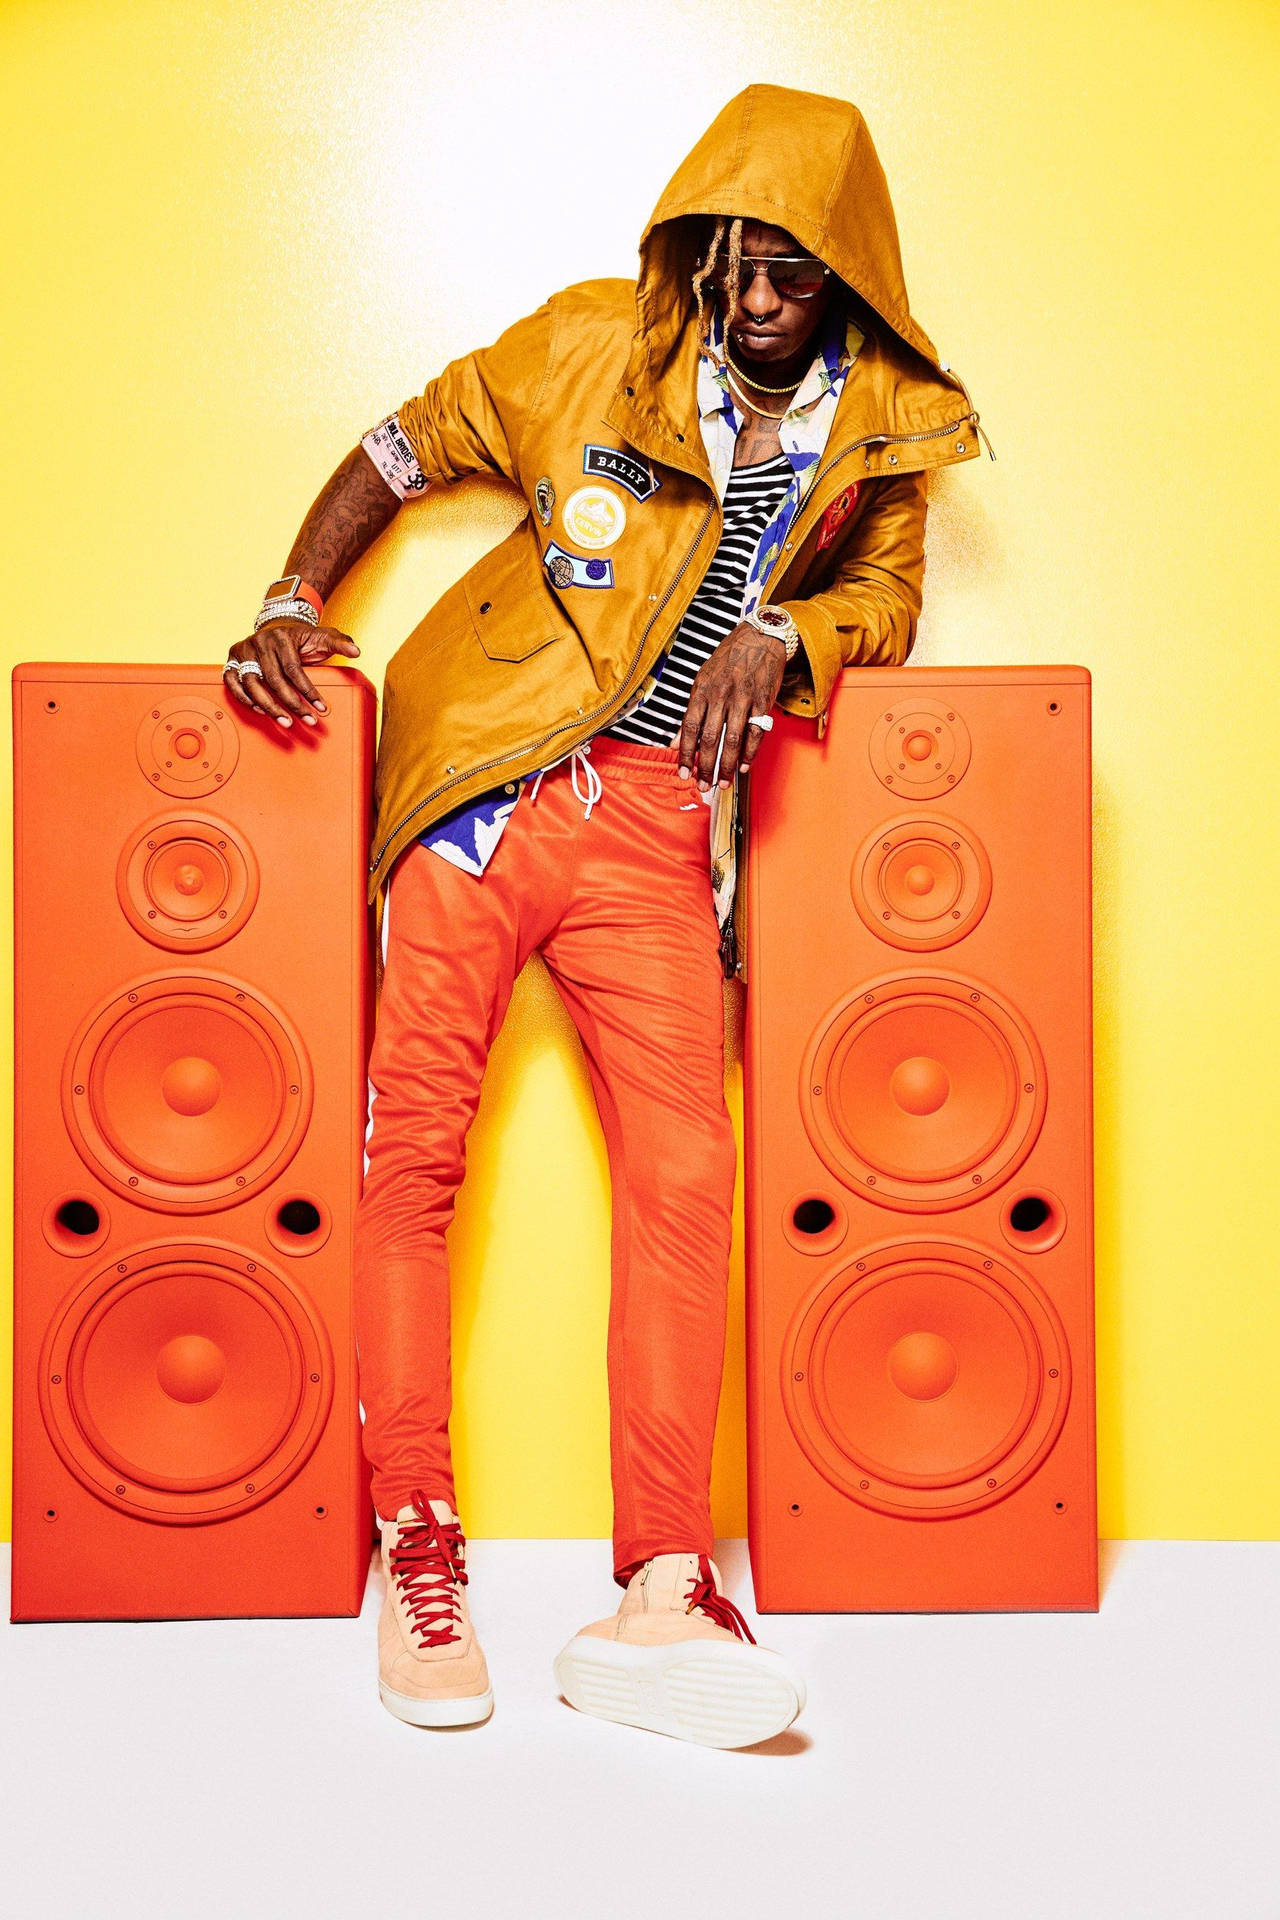 Young Thug Expresses His Eccentricity With An Orange Phone. Background